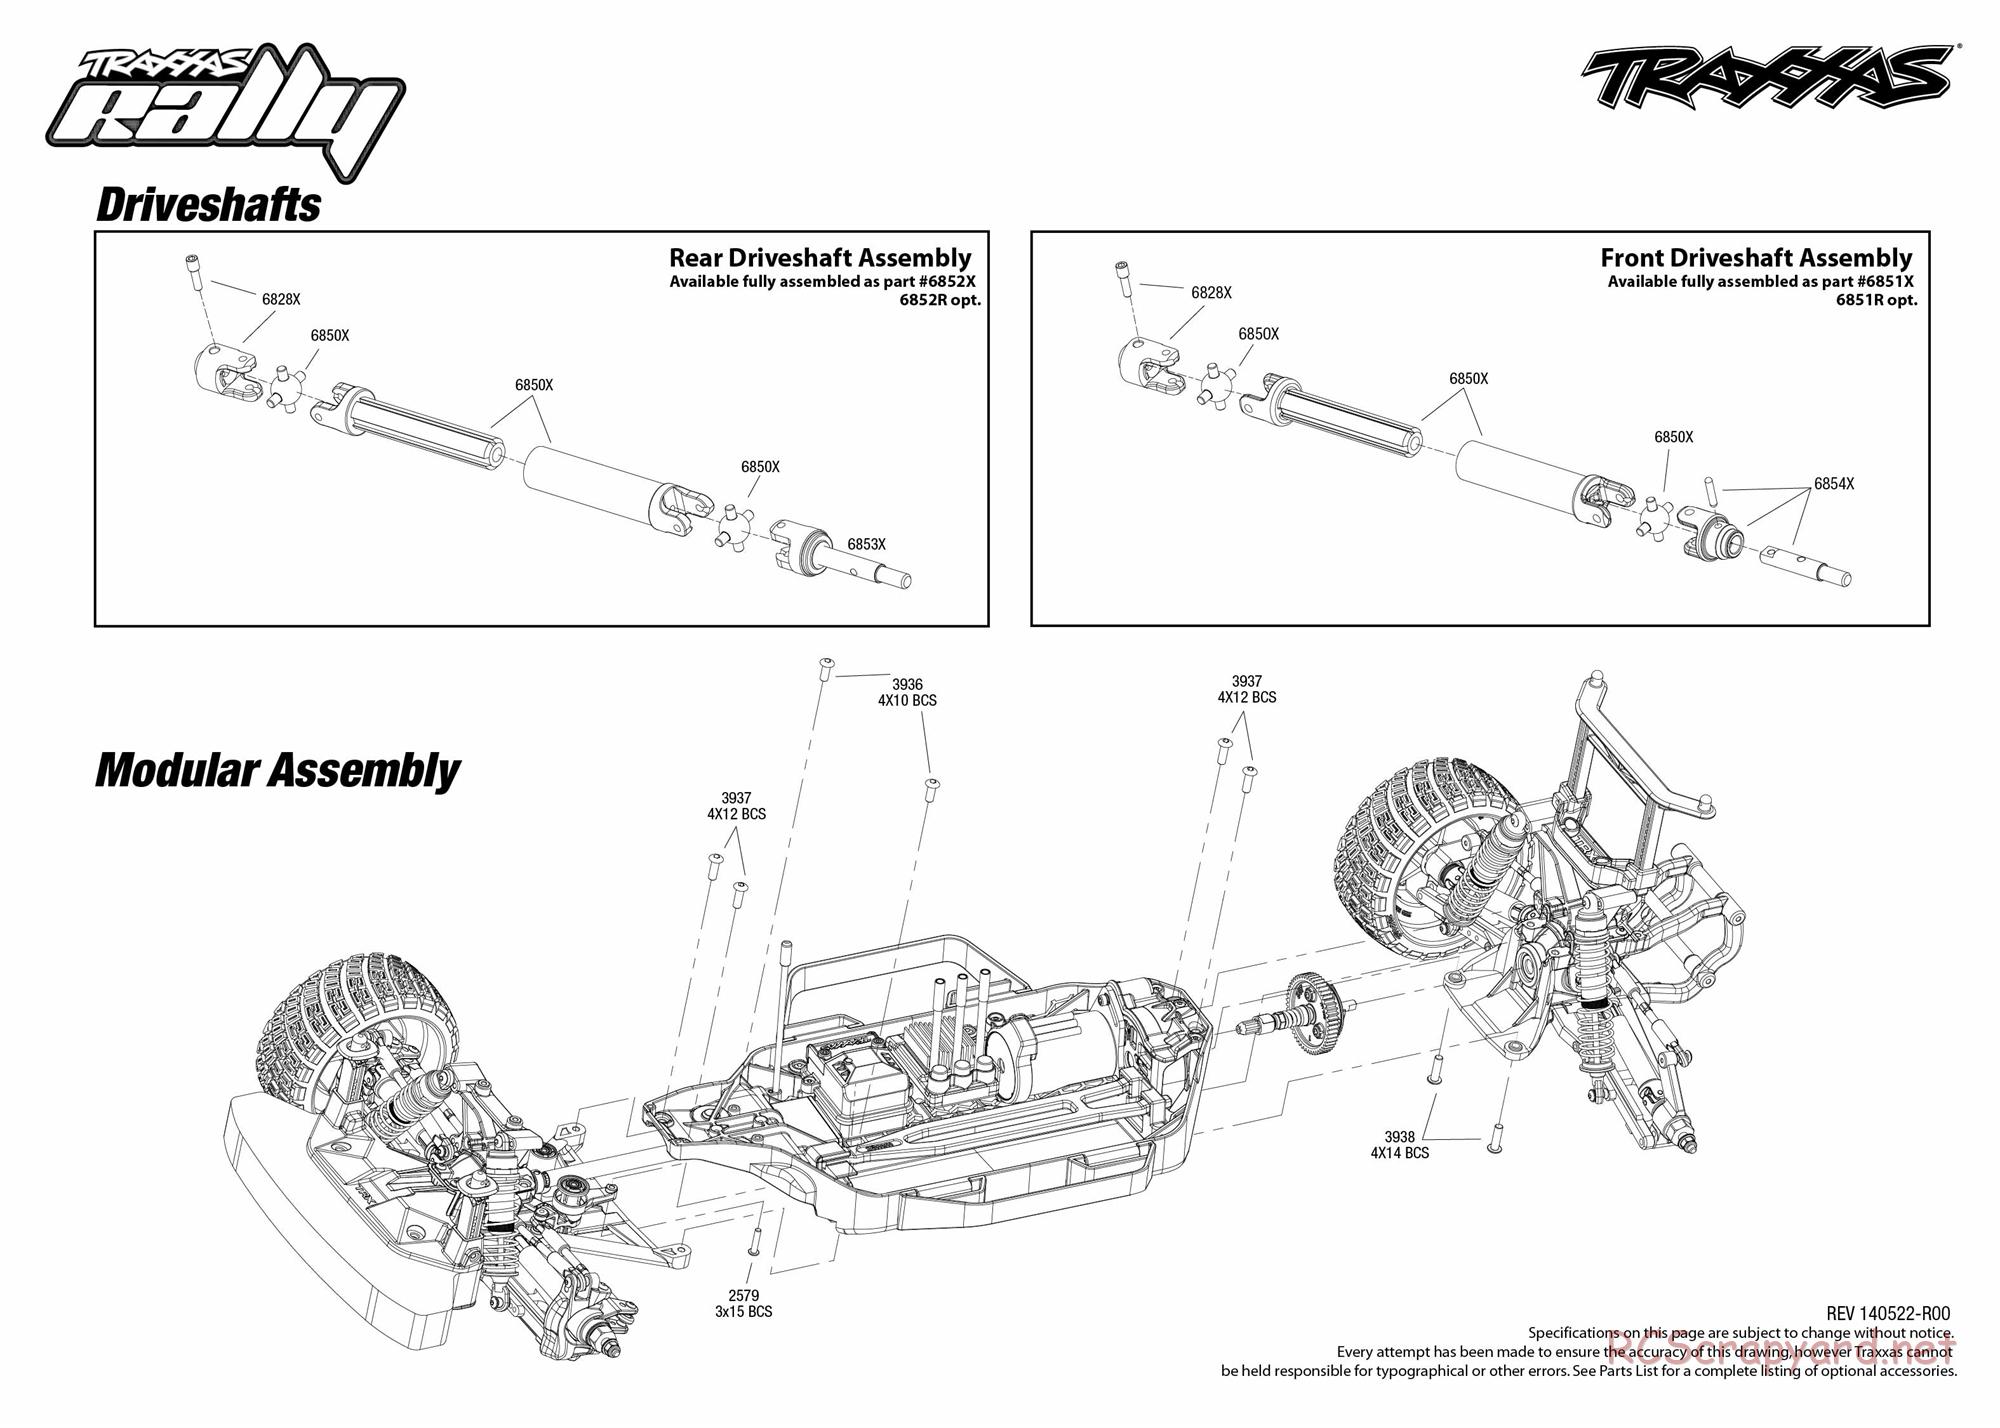 Traxxas - Rally (2014) - Exploded Views - Page 2